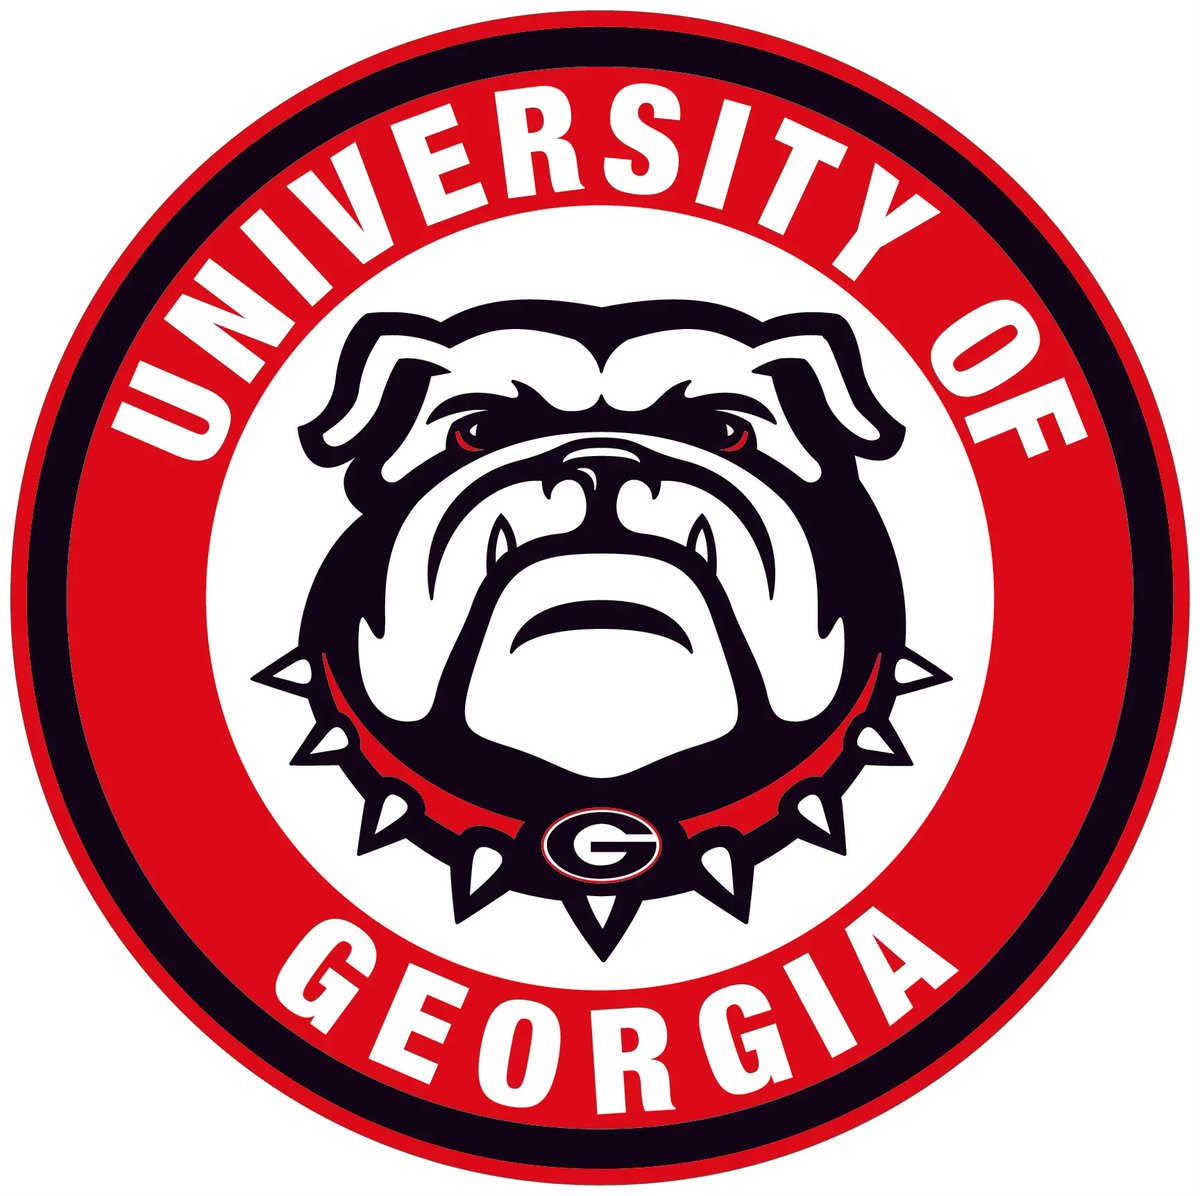 Blessed to receive an offer from @UGA_WBB @COACH_ABE @TBalerio